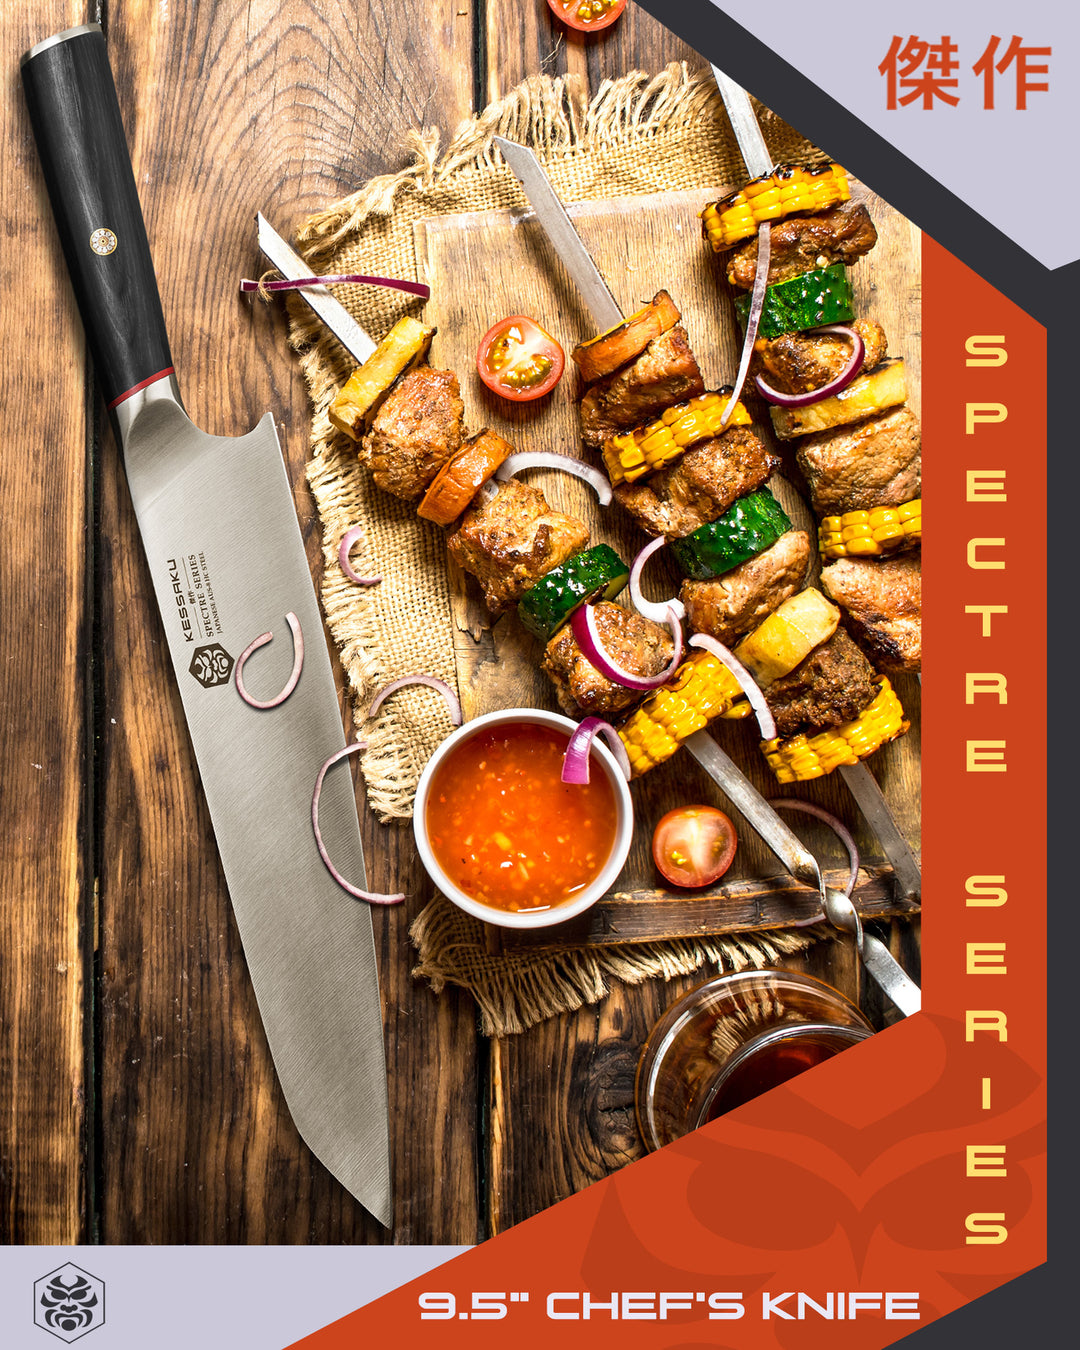 The Spectre K-Tip Chef's Knife next to skewers full of chicken, red onion, corn, squash, and cherry tomato